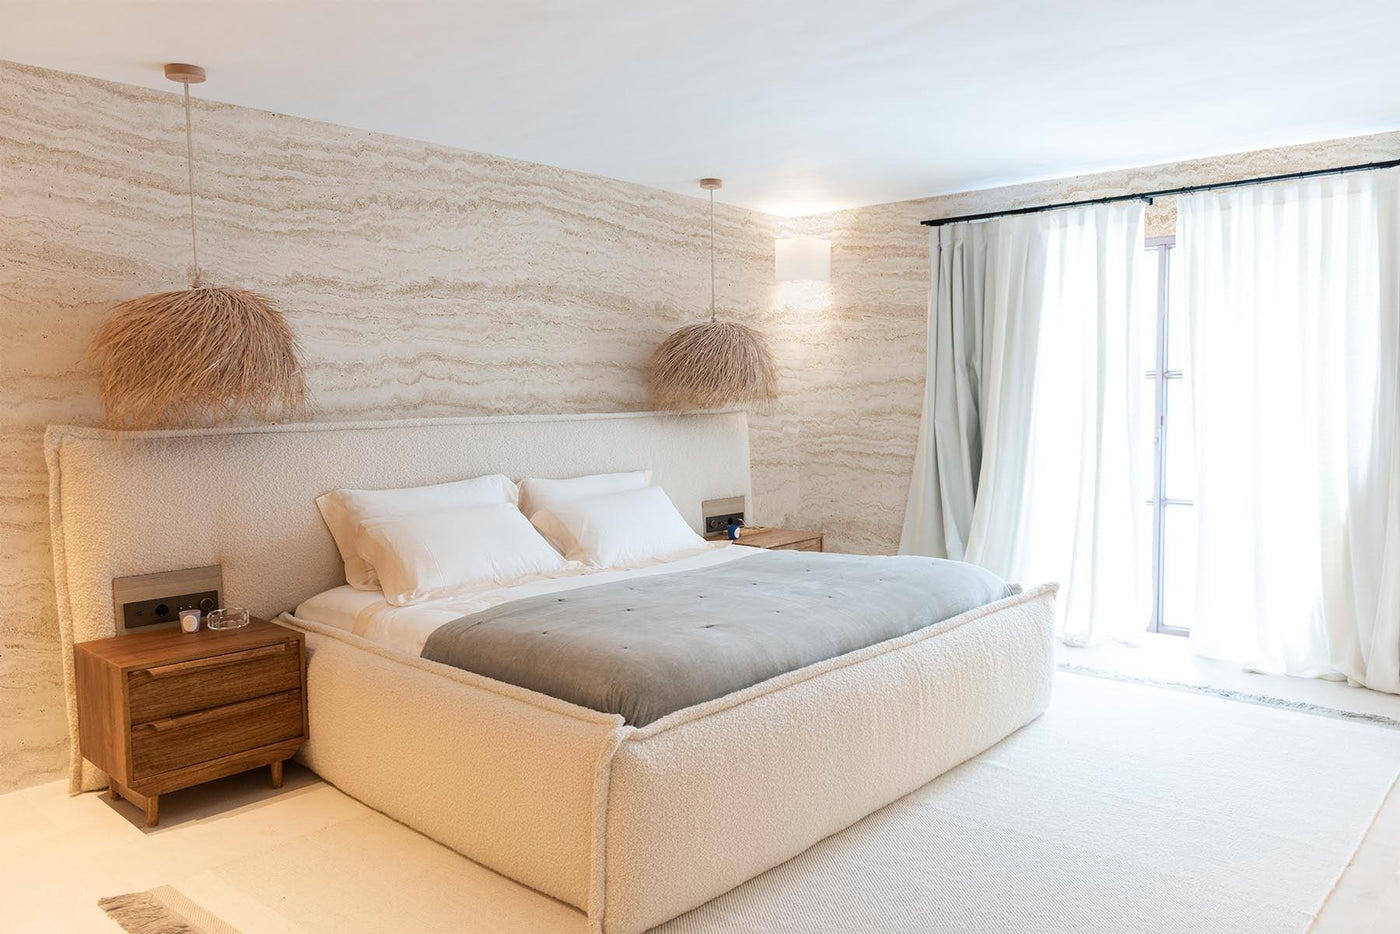 Sand colored travertine wall mural on the walls of this modern bedroom. White floor. Light beige bed with white bedding and light grey blanket. 